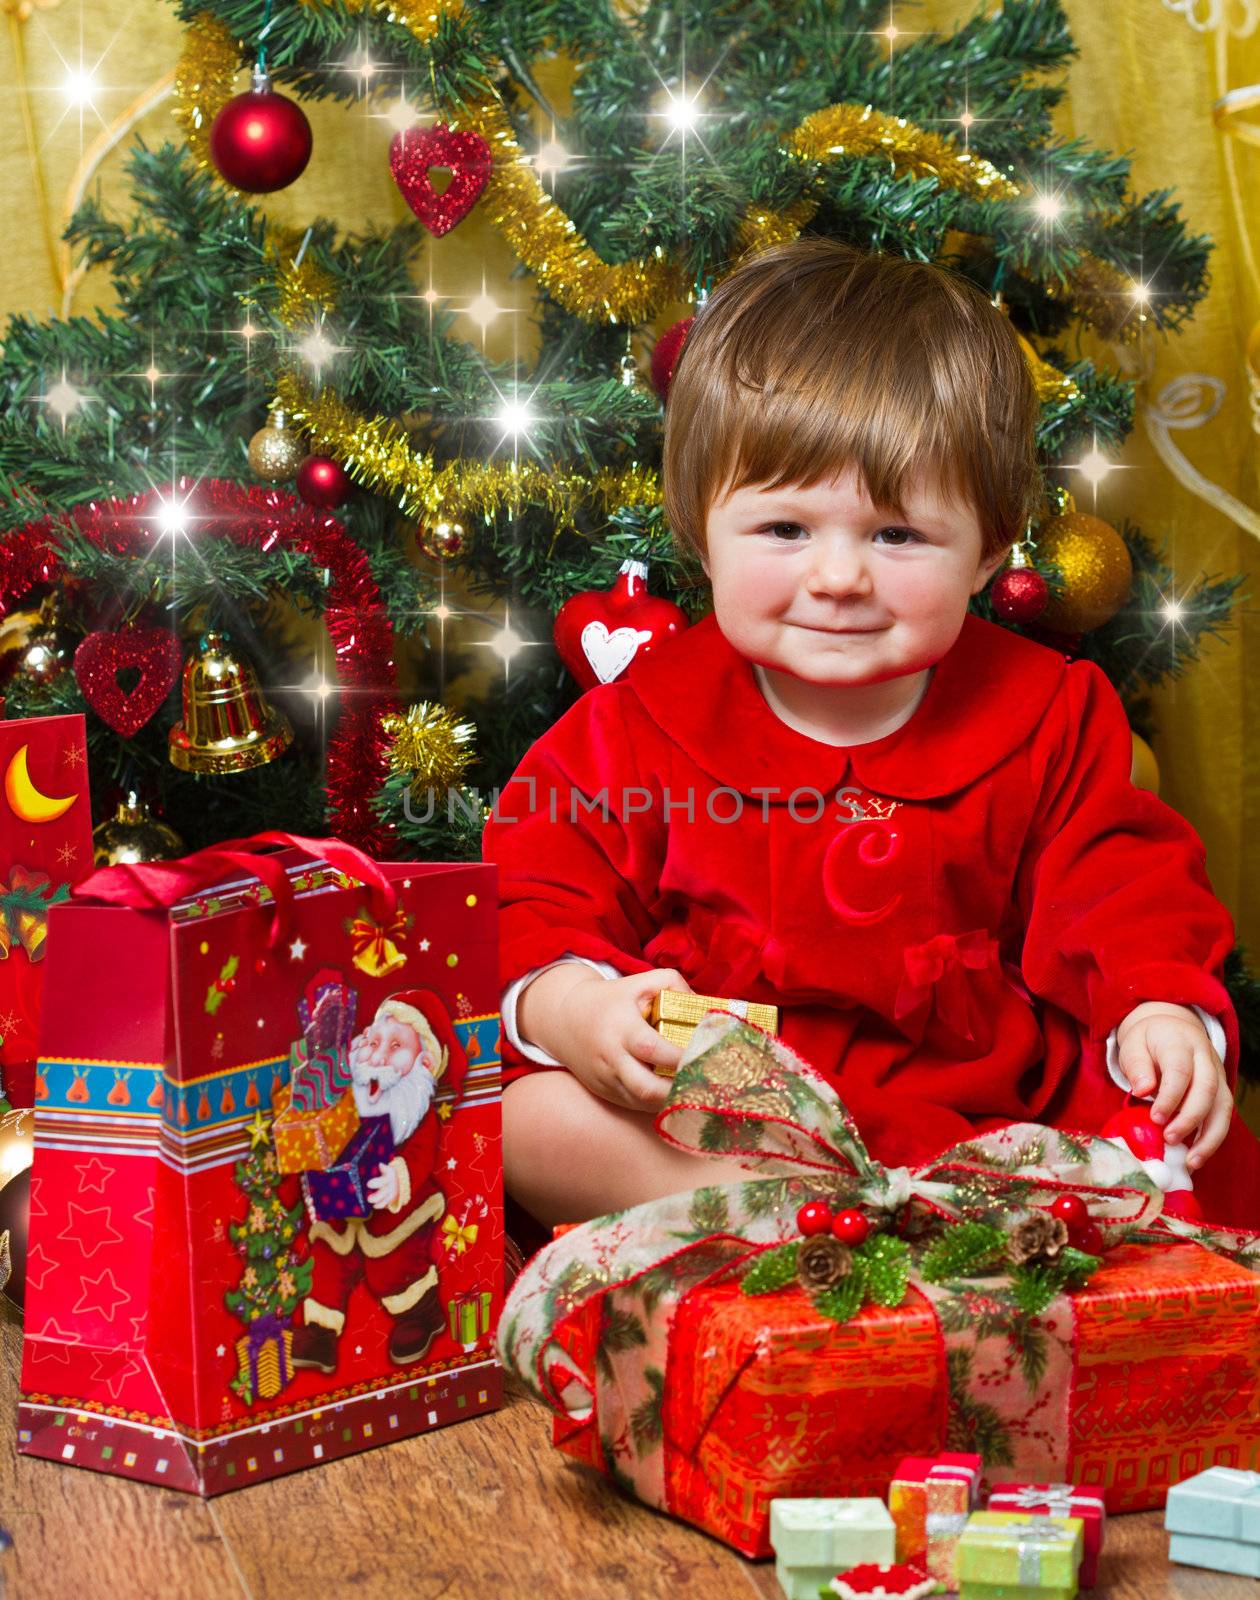 baby play with present box at Christmas tree by lsantilli